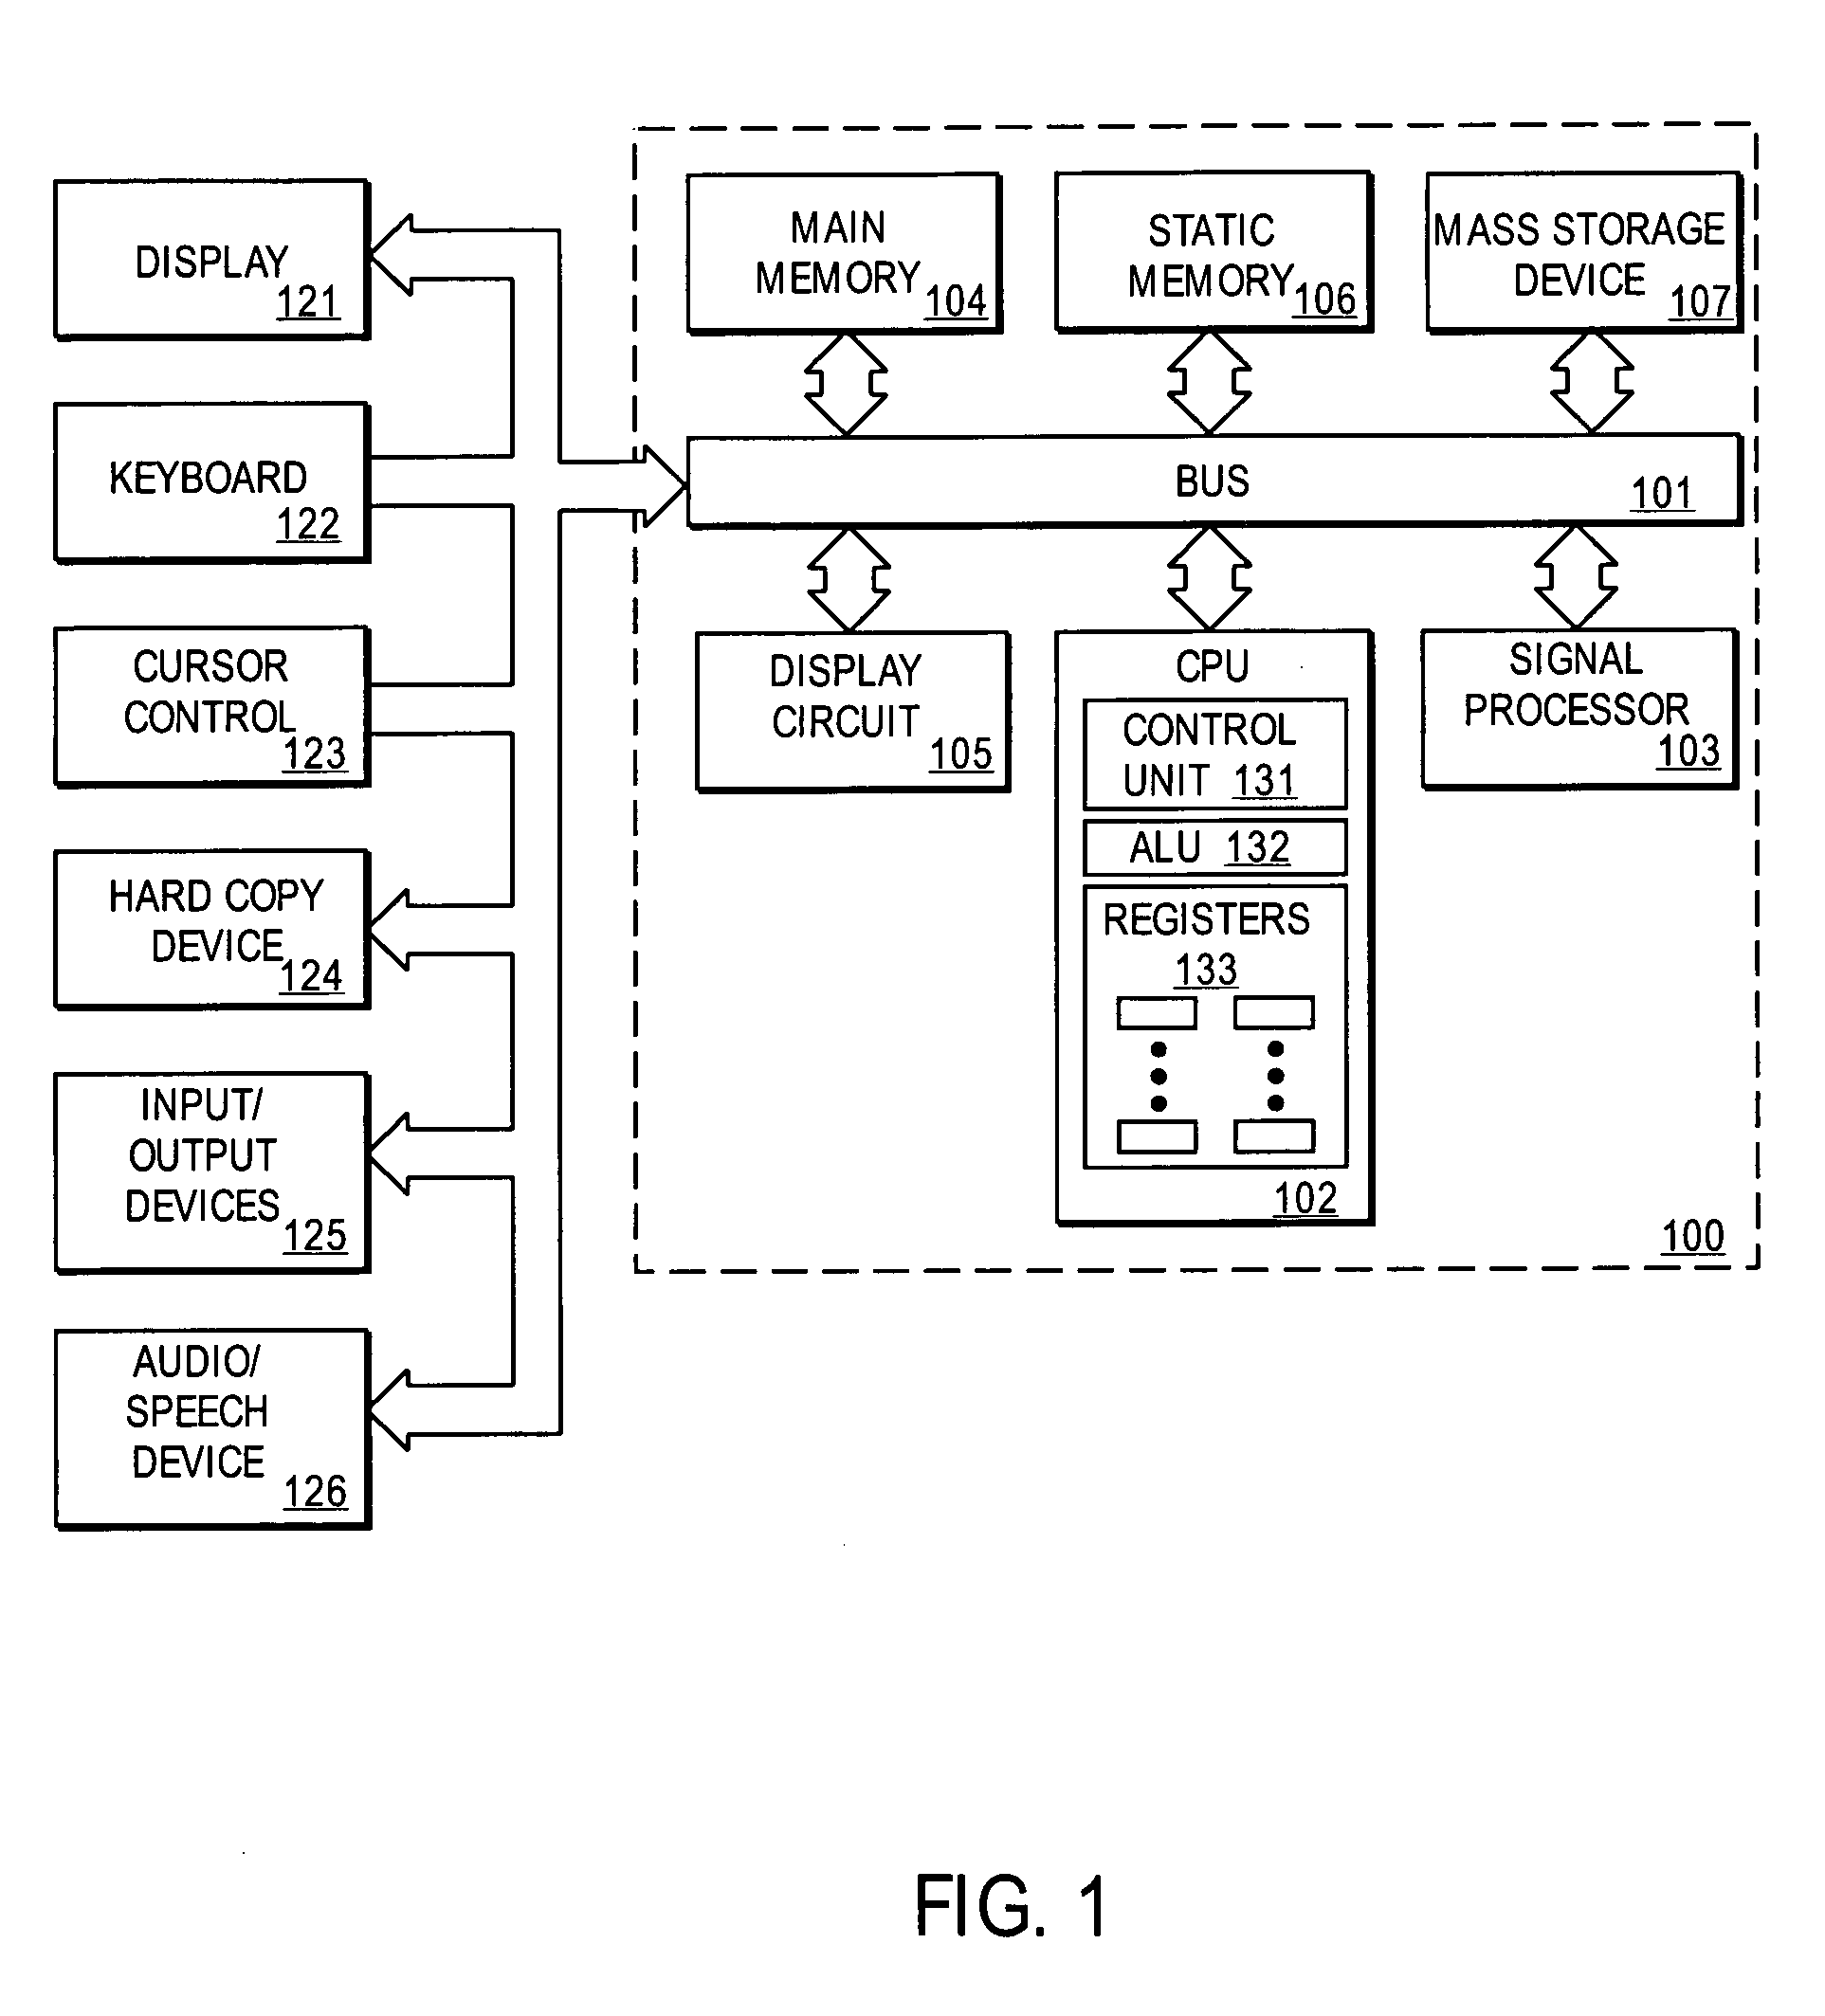 Method for providing system integrity and legacy environment emulation